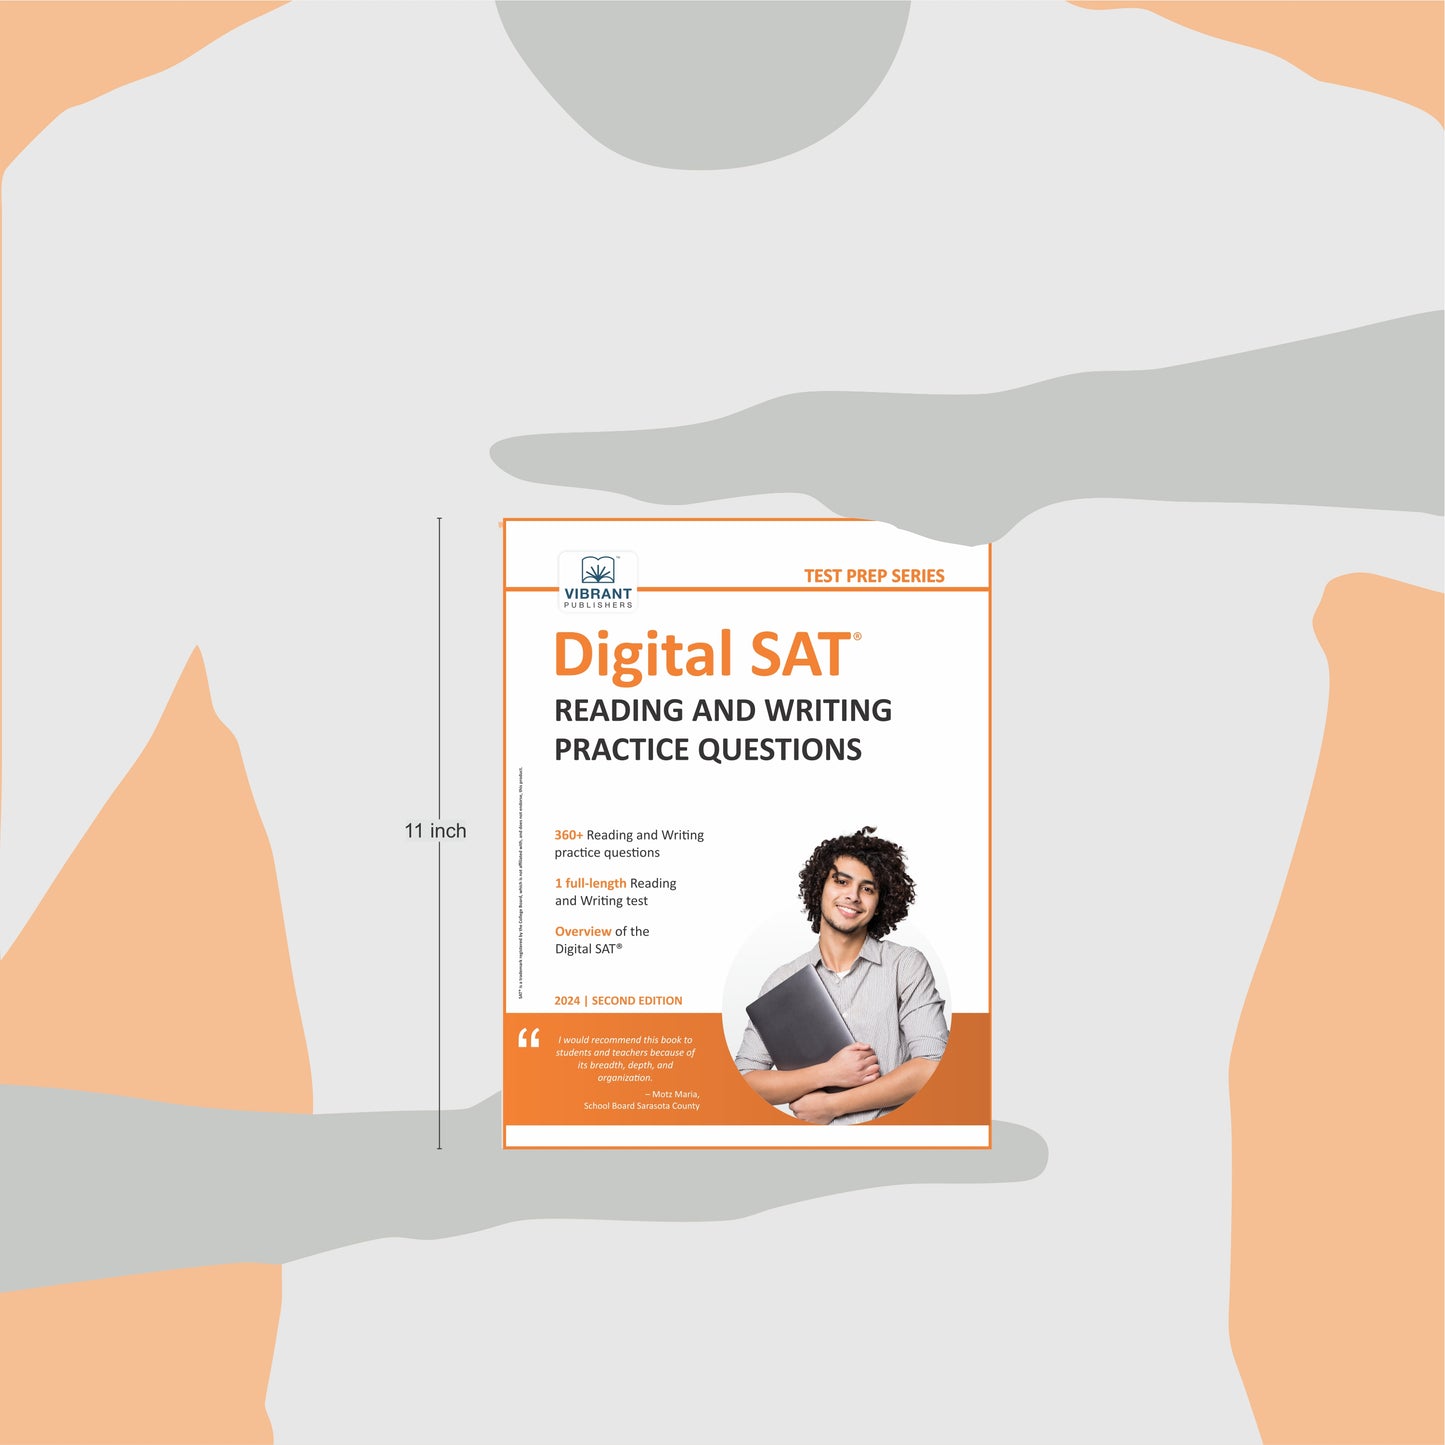 Digital SAT Reading and Writing Practice Questions (2024 Edition)